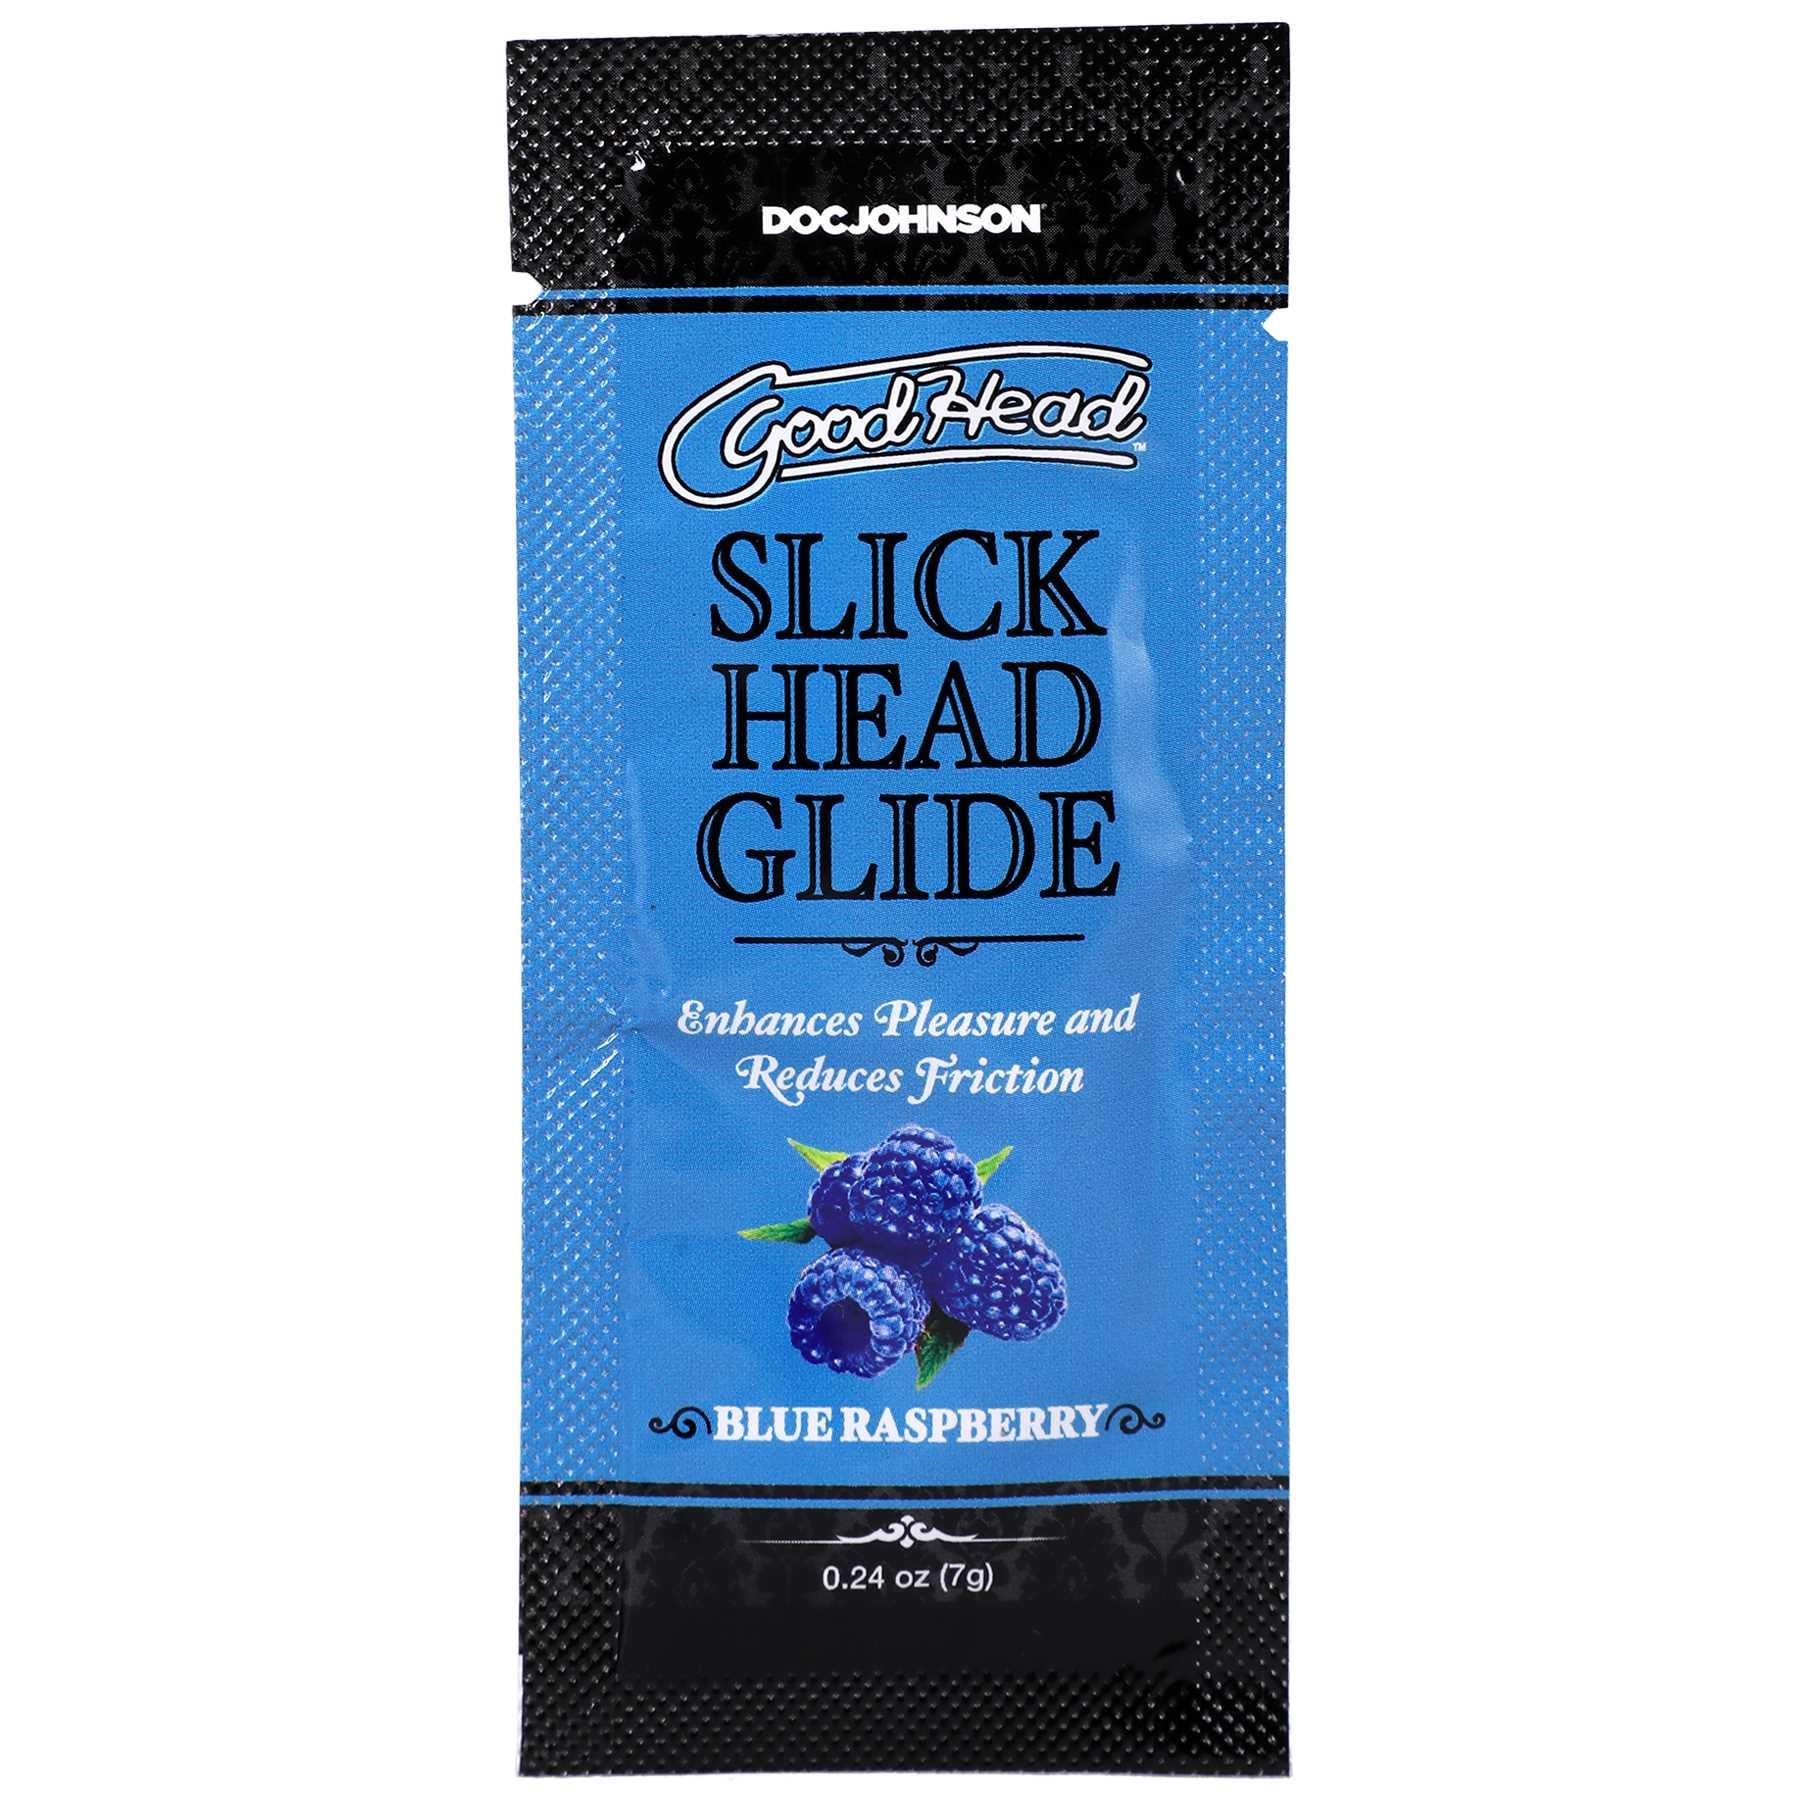 GoodHead - Slick Head Glide -blueberry front of package-  0.24 oz.